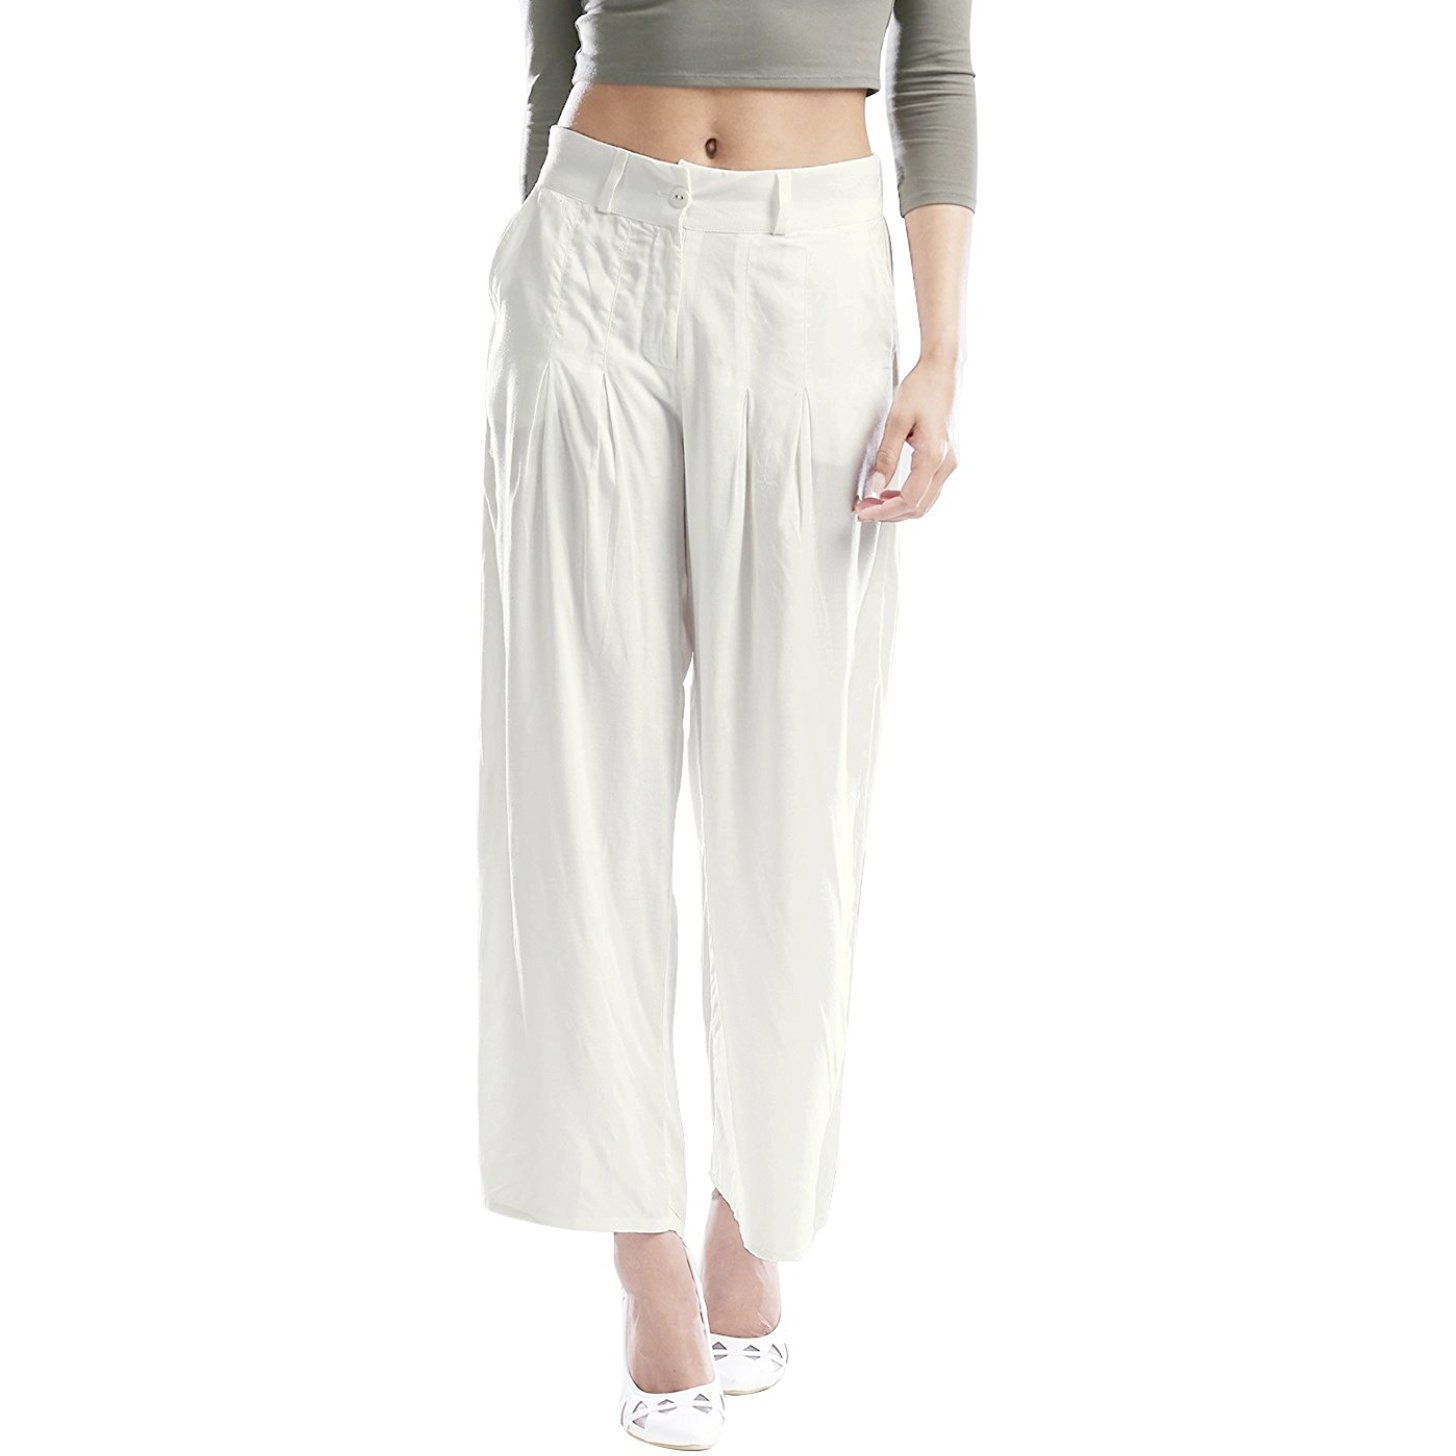 Winmaarc Women's High Waist Solid Color Casual Cotton Linen Loose Wide Leg Palazzo Pants